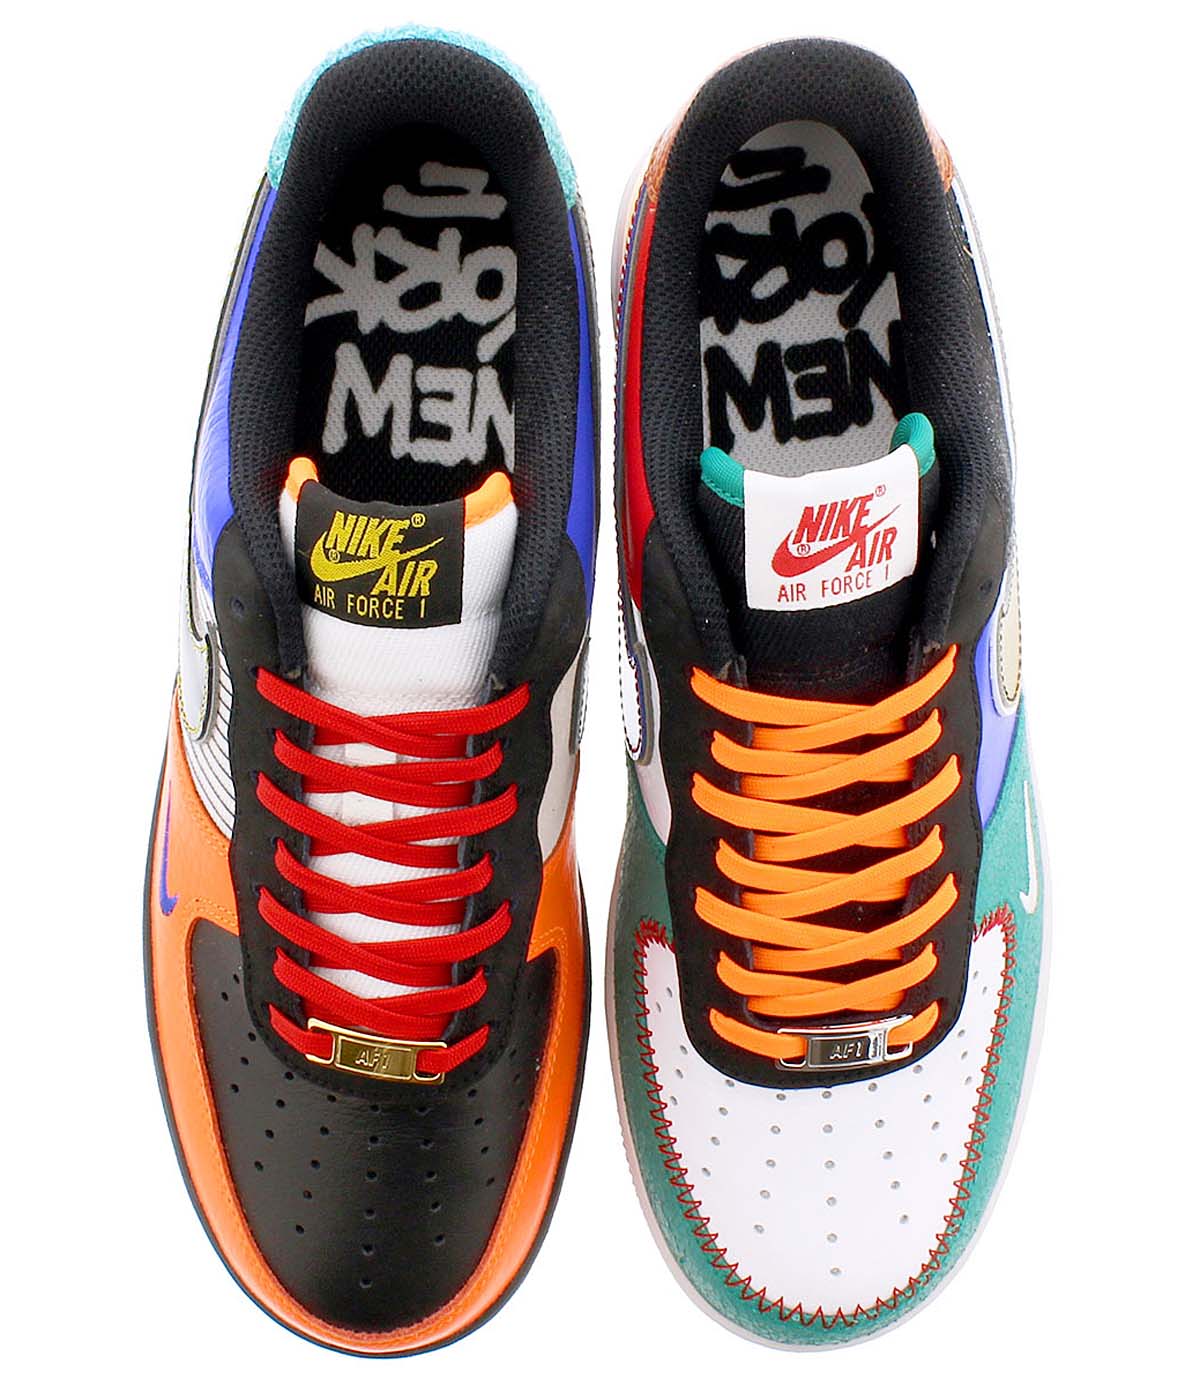 NIKE AIR FORCE 1 07 LV8 " WHAT THE NYC" WHITE /BLACK / TOTAL ORANGE-RACER BLUE CT3610-100 ナイキ エア フォース 1 07 LV8 WHAT THE NYC ホワイト/ブラック/オレンジ/ブルー